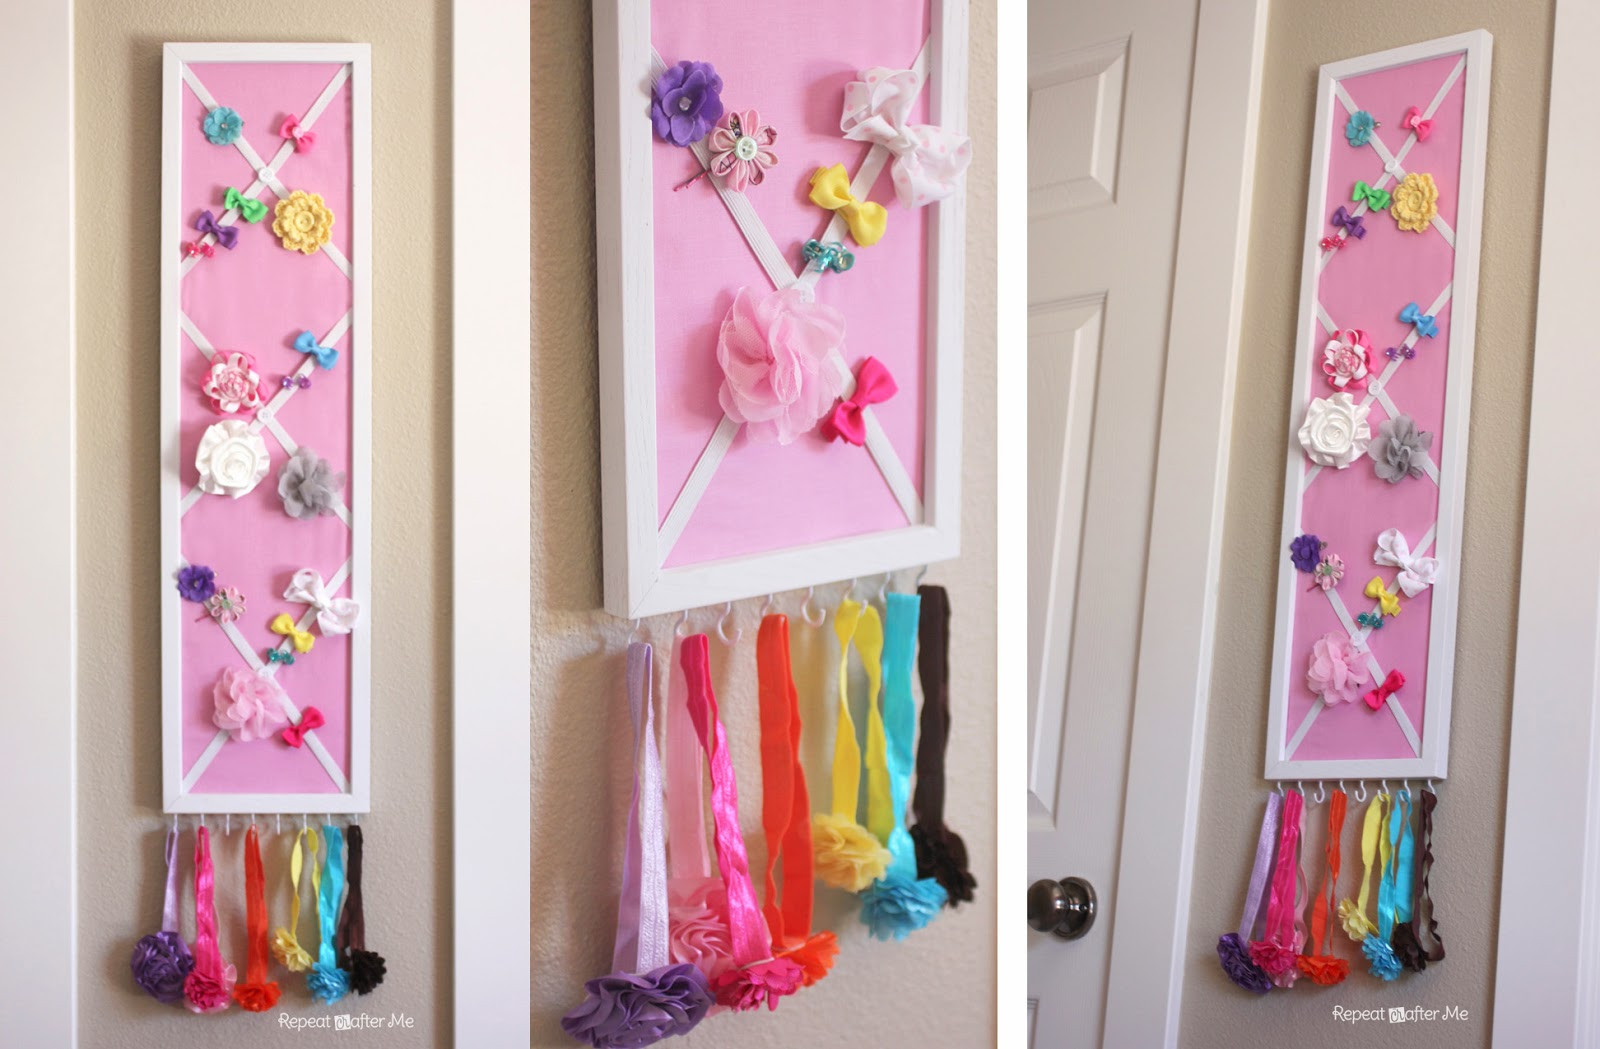 Diy Baby Girl Room Decorations
 Baby Girl Nursery DIY decorating ideas Repeat Crafter Me